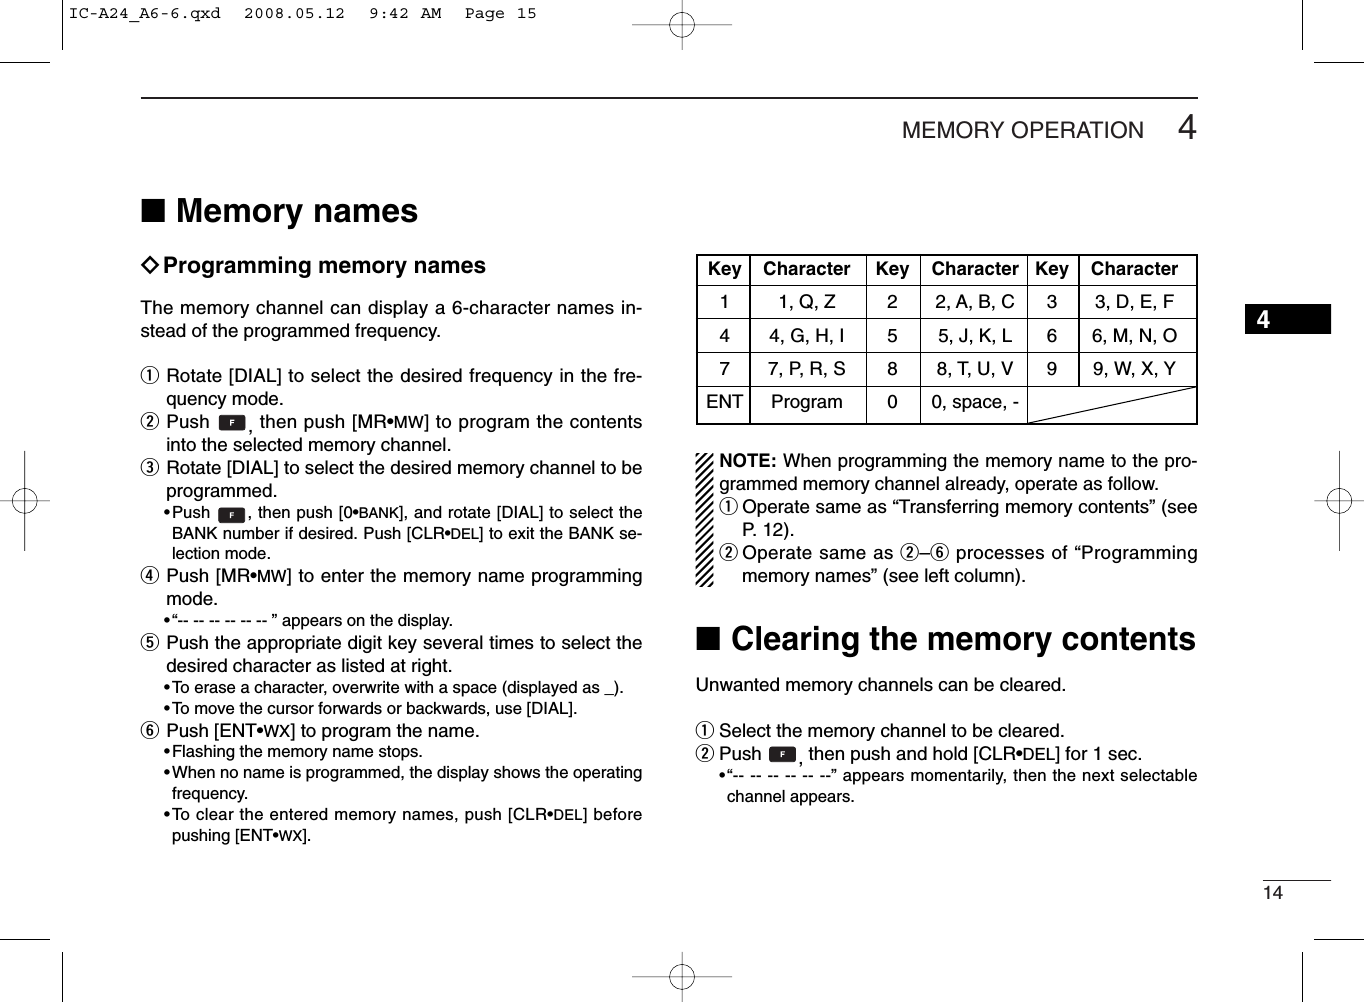 144MEMORY OPERATION■Memory namesïProgramming memory namesThe memory channel can display a 6-character names in-stead of the programmed frequency.qRotate [DIAL] to select the desired frequency in the fre-quency mode.wPush  ,then push [MR•MW] to program the contentsinto the selected memory channel.eRotate [DIAL] to select the desired memory channel to beprogrammed.•Push  , then push [0•BANK], and rotate [DIAL] to select theBANK number if desired. Push [CLR•DEL] to exit the BANK se-lection mode.rPush [MR•MW] to enter the memory name programmingmode.•“-- -- -- -- -- -- ” appears on the display.tPush the appropriate digit key several times to select thedesired character as listed at right.•To erase a character, overwrite with a space (displayed as _).•To move the cursor forwards or backwards, use [DIAL].yPush [ENT•WX] to program the name.•Flashing the memory name stops.•When no name is programmed, the display shows the operatingfrequency.•To clear the entered memory names, push [CLR•DEL] beforepushing [ENT•WX].NOTE: When programming the memory name to the pro-grammed memory channel already, operate as follow.qOperate same as “Transferring memory contents” (seeP. 12).wOperate same as w–yprocesses of “Programmingmemory names” (see left column).■Clearing the memory contentsUnwanted memory channels can be cleared.qSelect the memory channel to be cleared.wPush , then push and hold [CLR•DEL] for 1 sec.•“-- -- -- -- -- --” appears momentarily, then the next selectablechannel appears.Key Character Key Character Key Character1 1, Q, Z 2 2, A, B, C 3 3, D, E, F4 4, G, H, I 5 5, J, K, L 6 6, M, N, O7 7, P, R, S 8 8, T, U, V 9 9, W, X, YENT Program 0 0, space, -4IC-A24_A6-6.qxd  2008.05.12  9:42 AM  Page 15